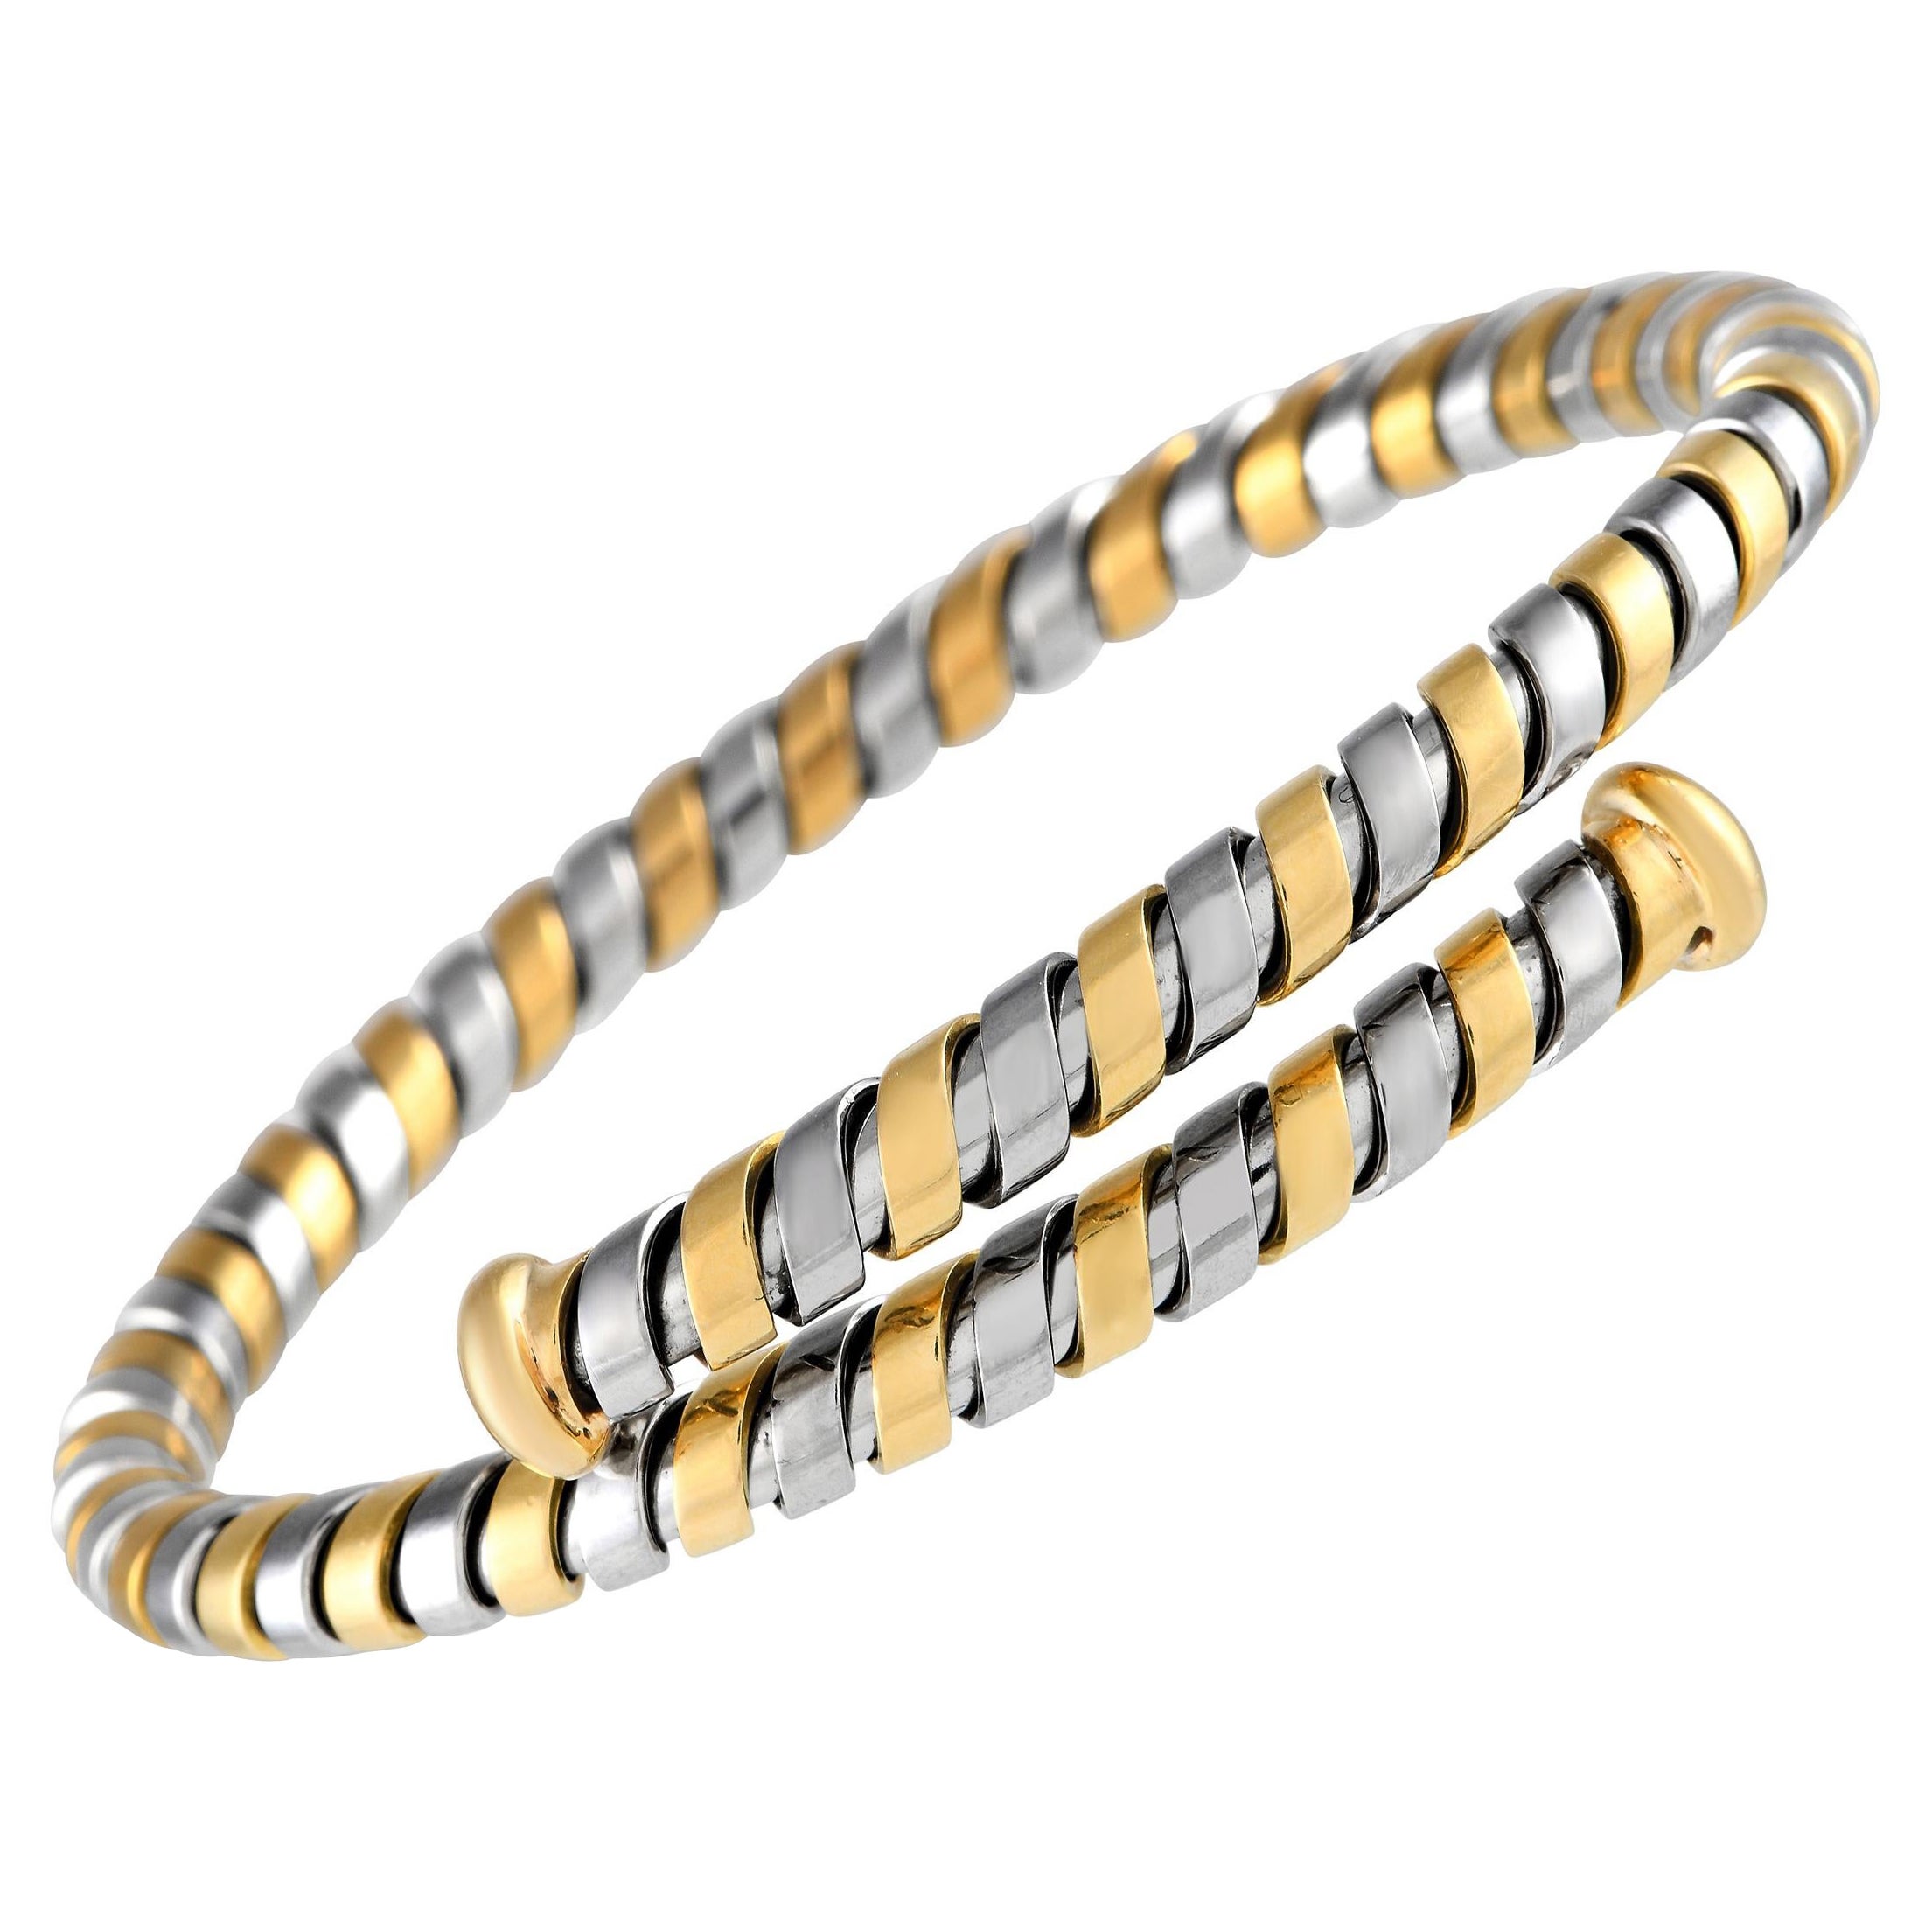 Bvlgari Tubogas 18K Yellow Gold and Stainless Steel Coil Bangle Bracelet For Sale